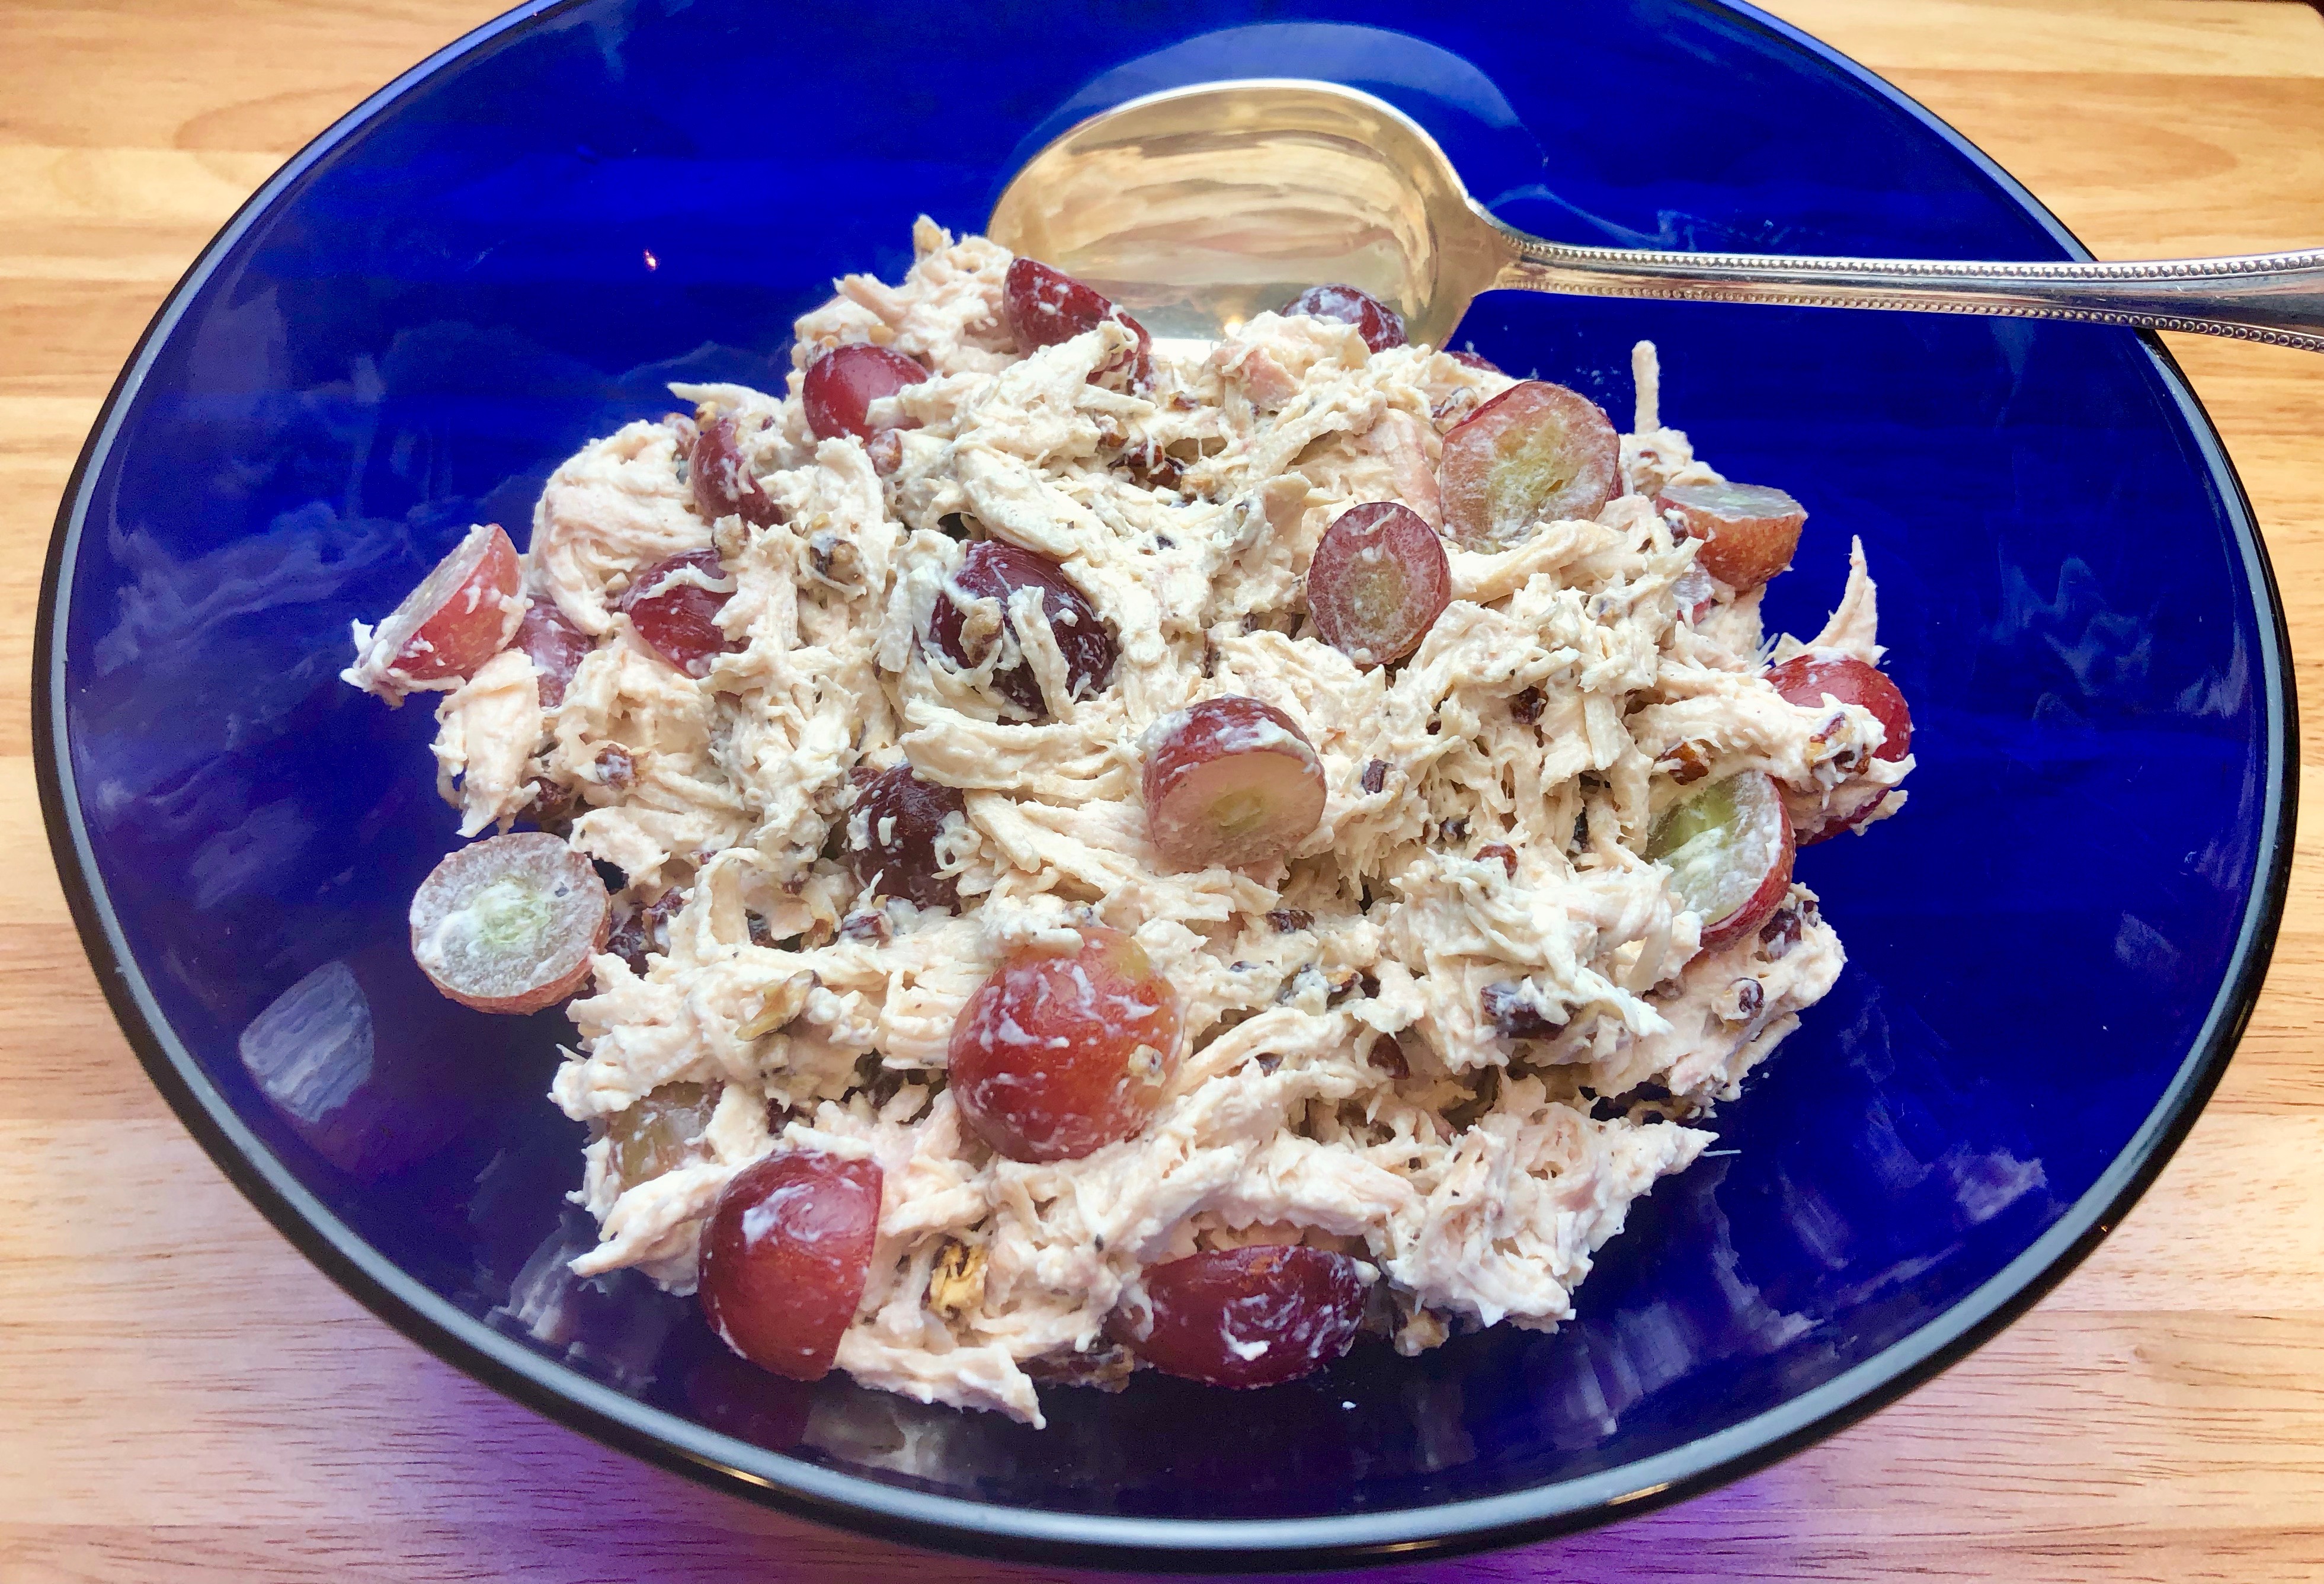 Chicken Salad with Grapes and Toasted Pecans